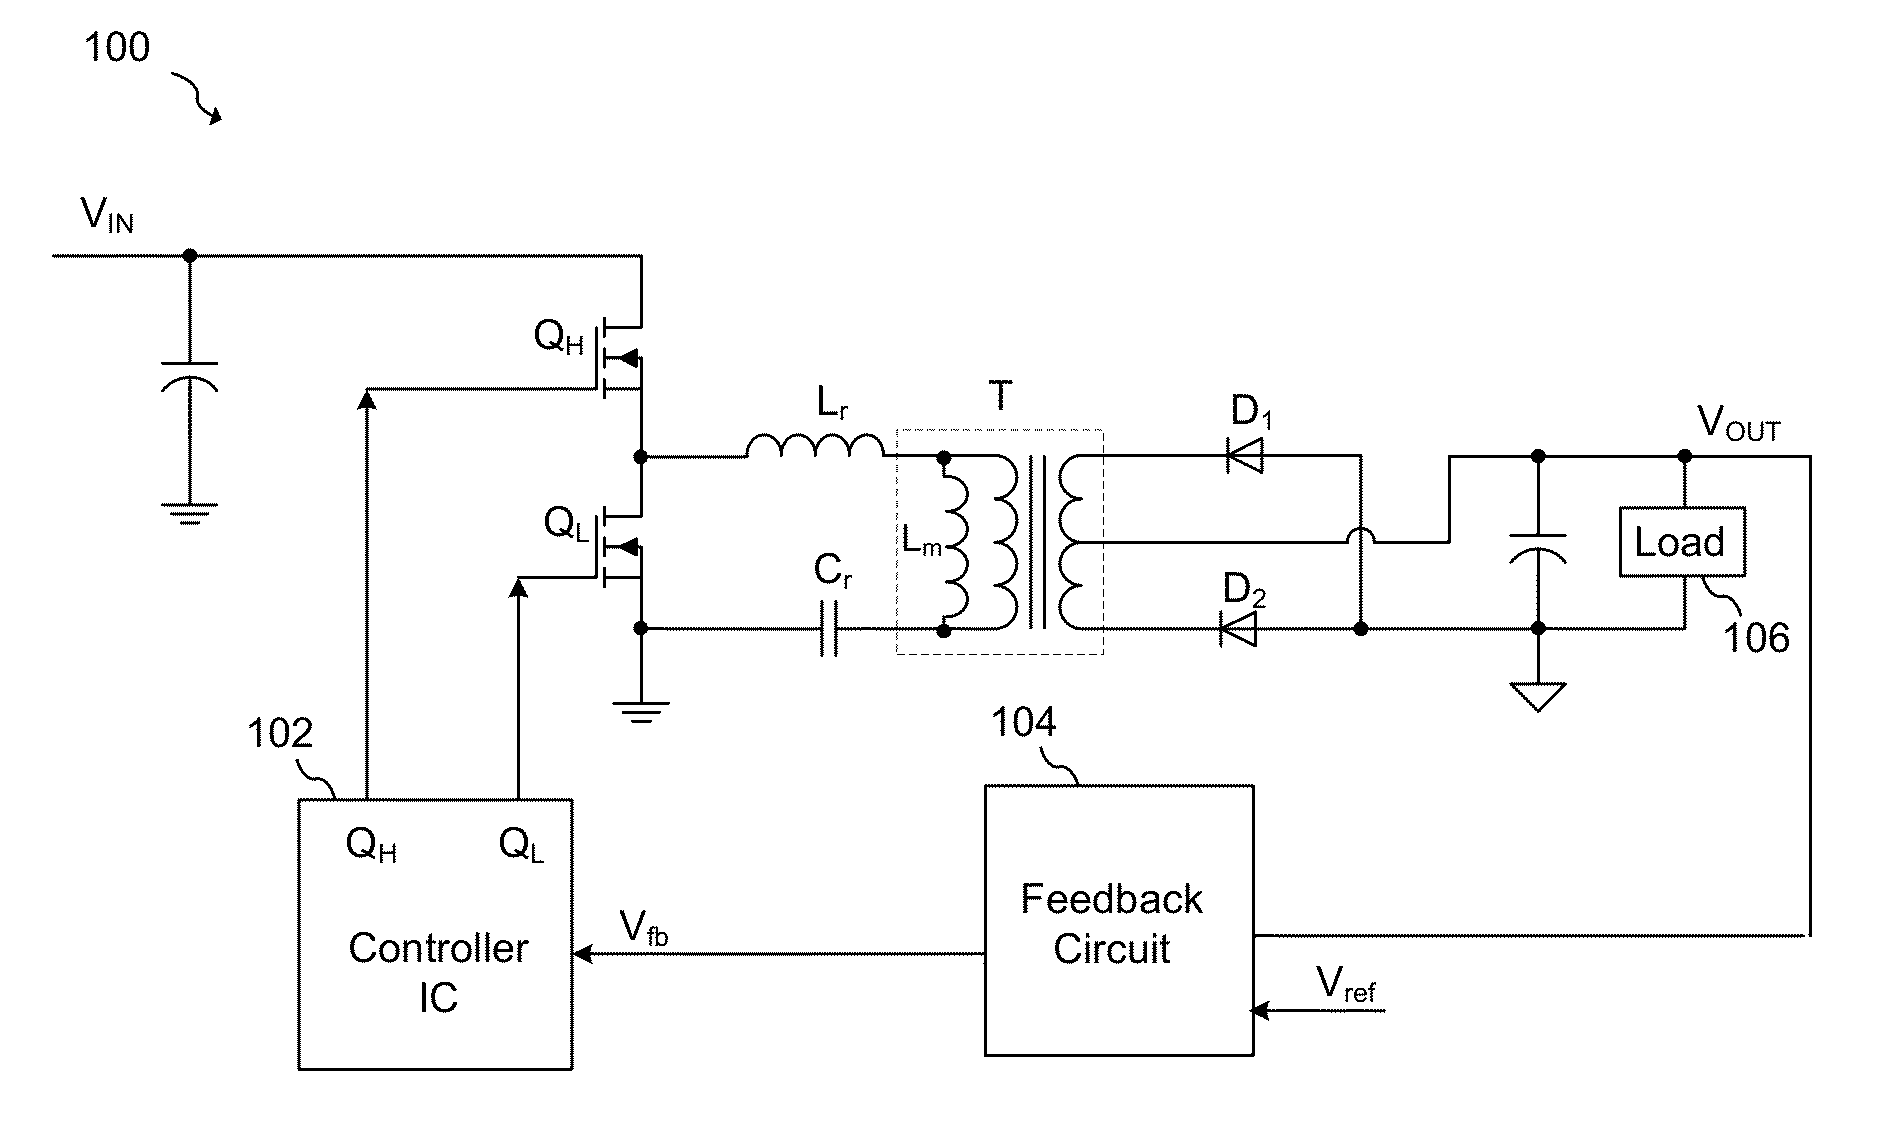 Multi-Mode Operation and Control of a Resonant Converter